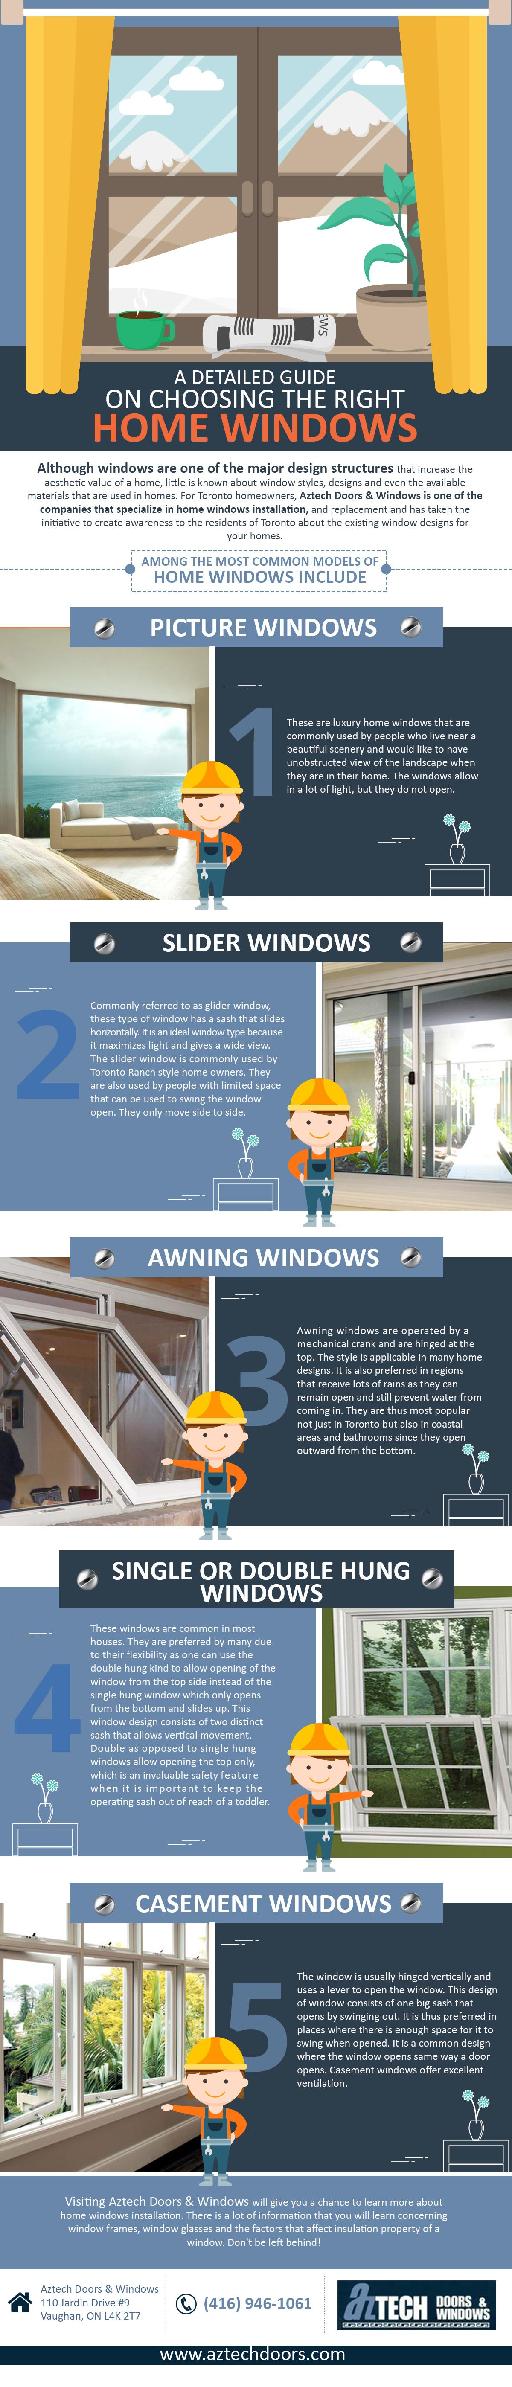 Detailed Guide on Choosing the Right Home Windows